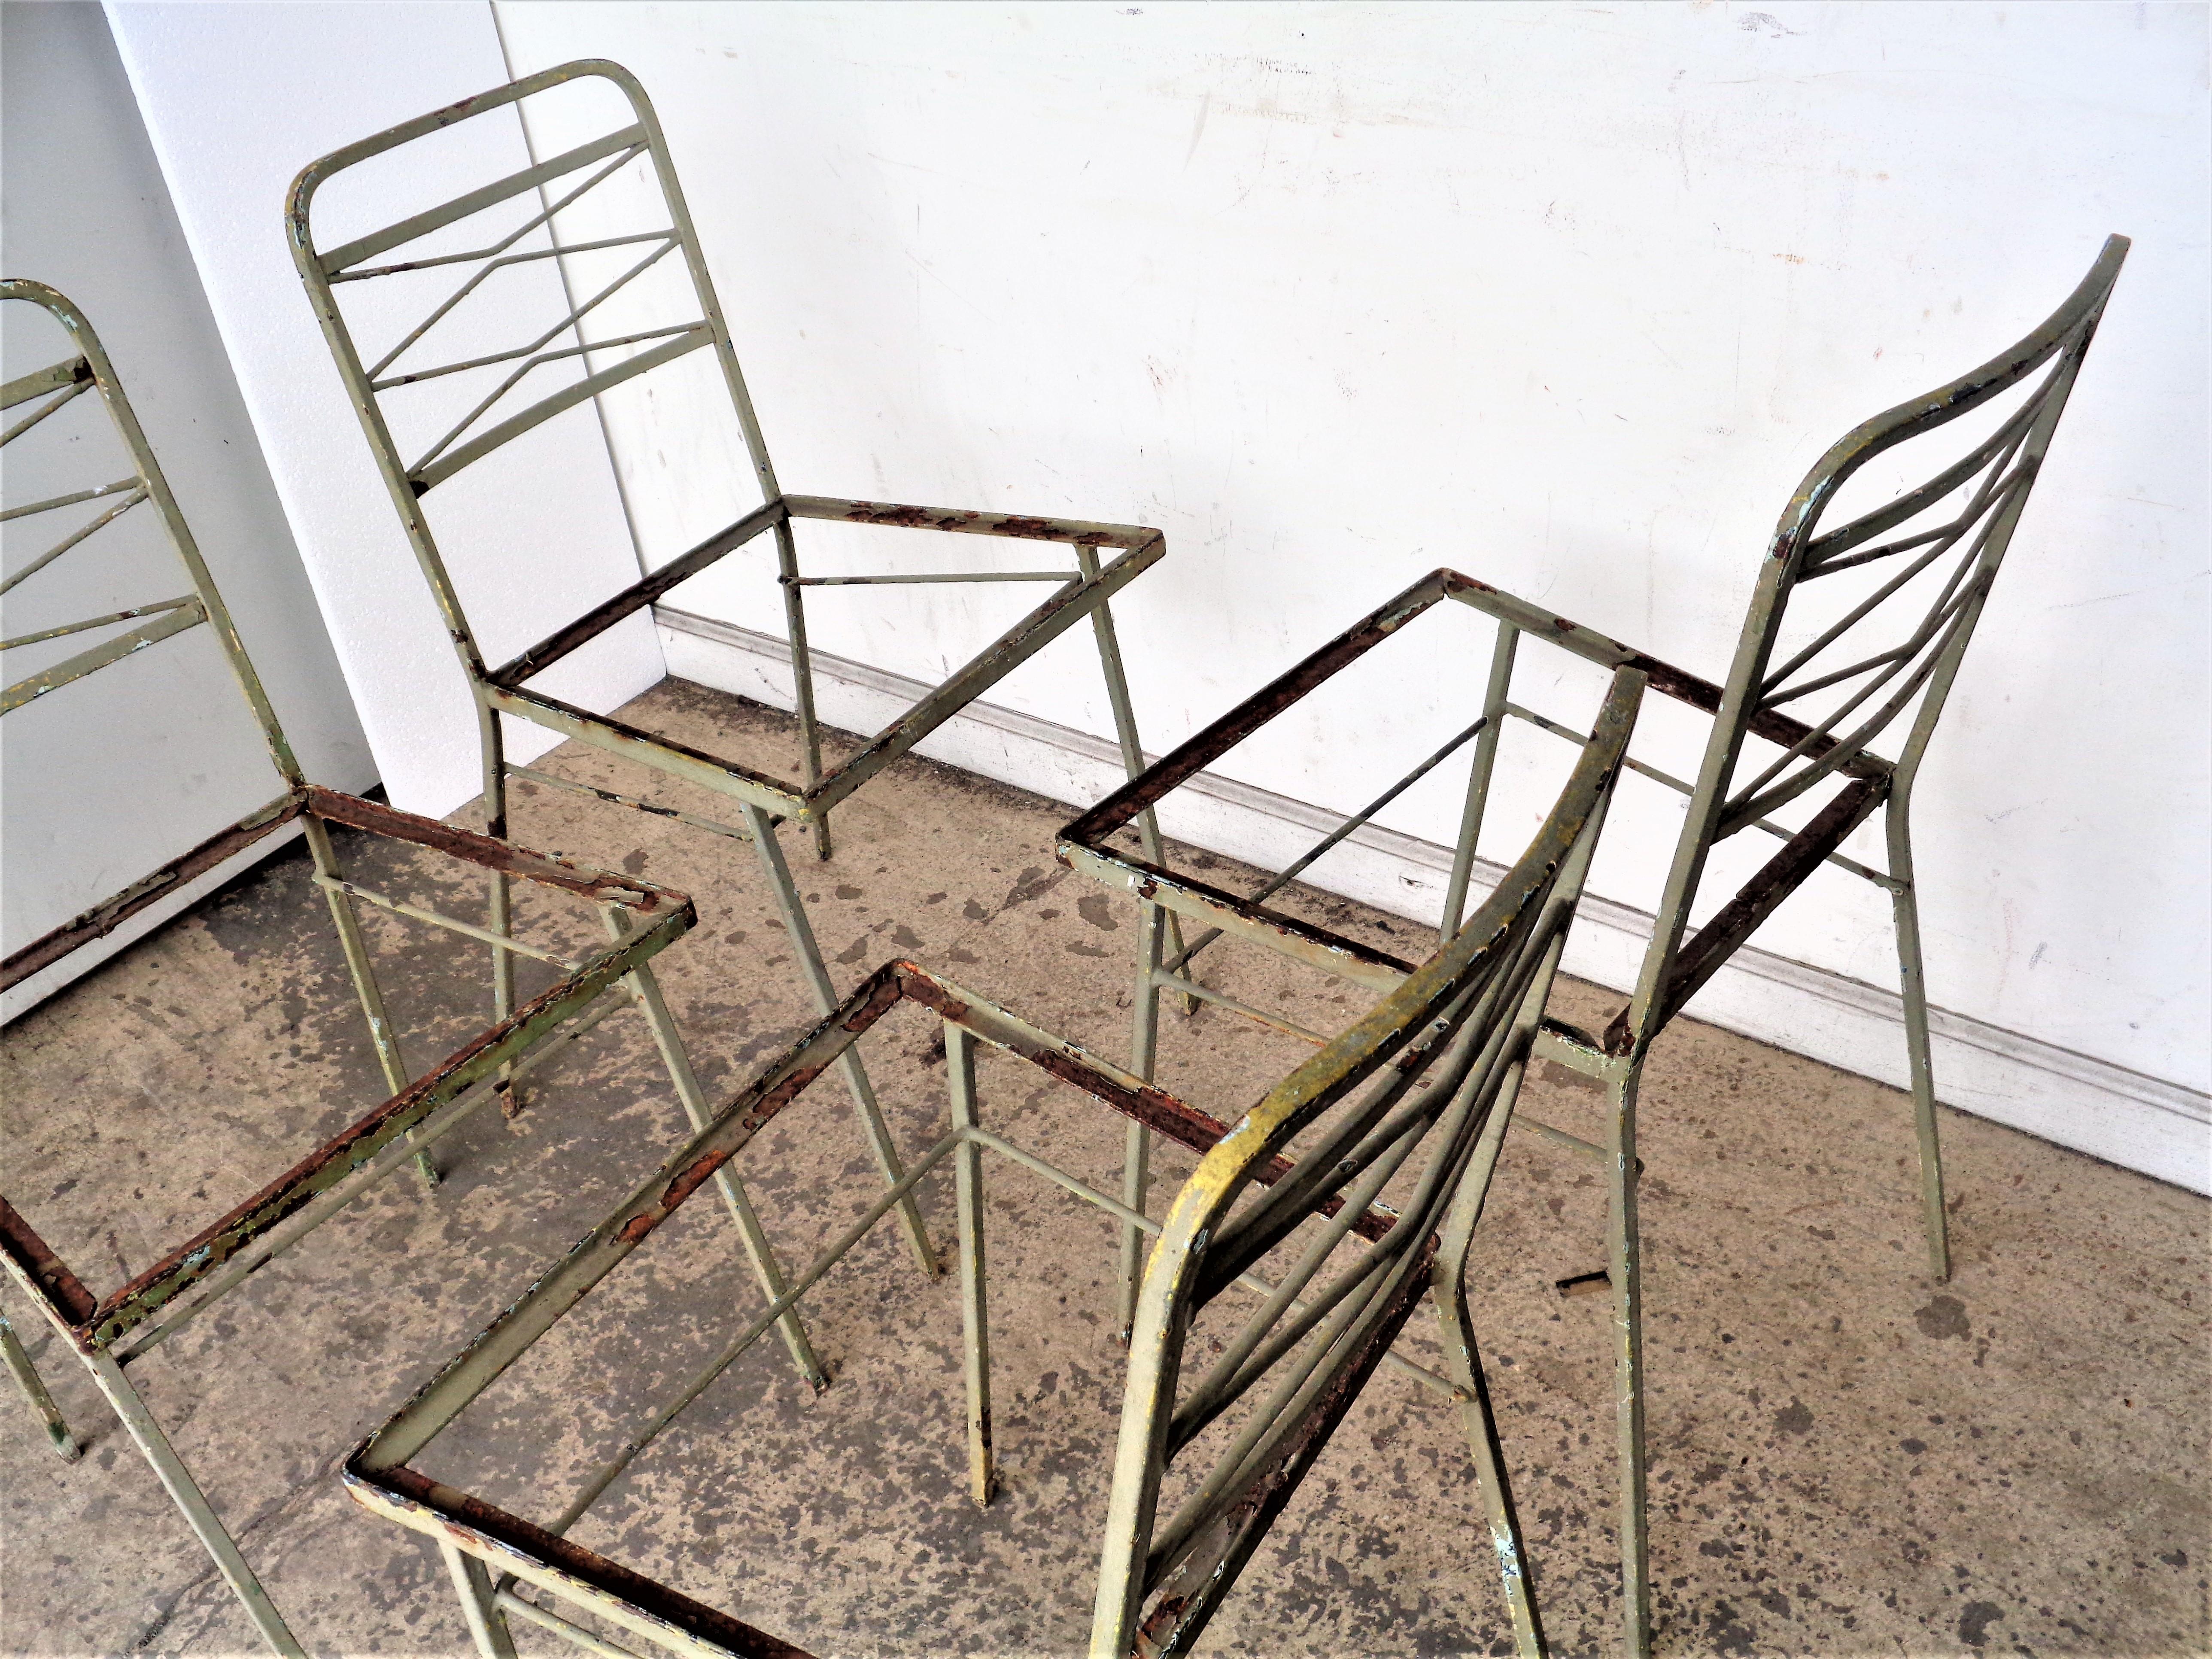   1940's Modernist Wrought Iron Chairs, Set of Four For Sale 2